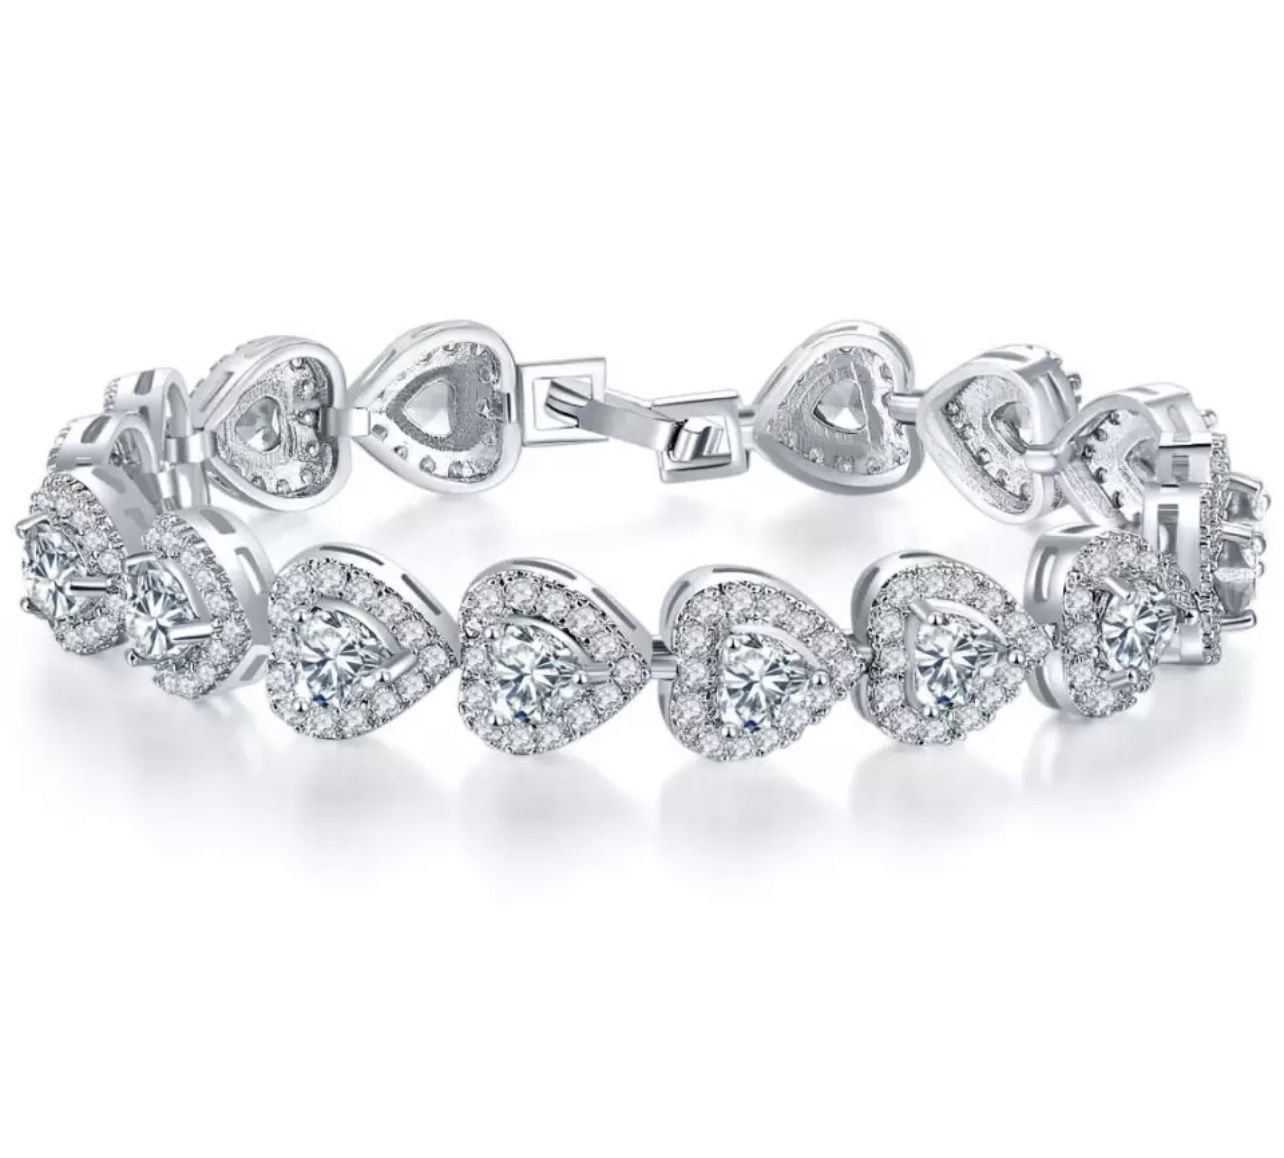 Brand New In Box Heart Shaped Sterling Silversmith Cubic Zircon Bracelet New In A Box It’s More Beautiful Than Picture